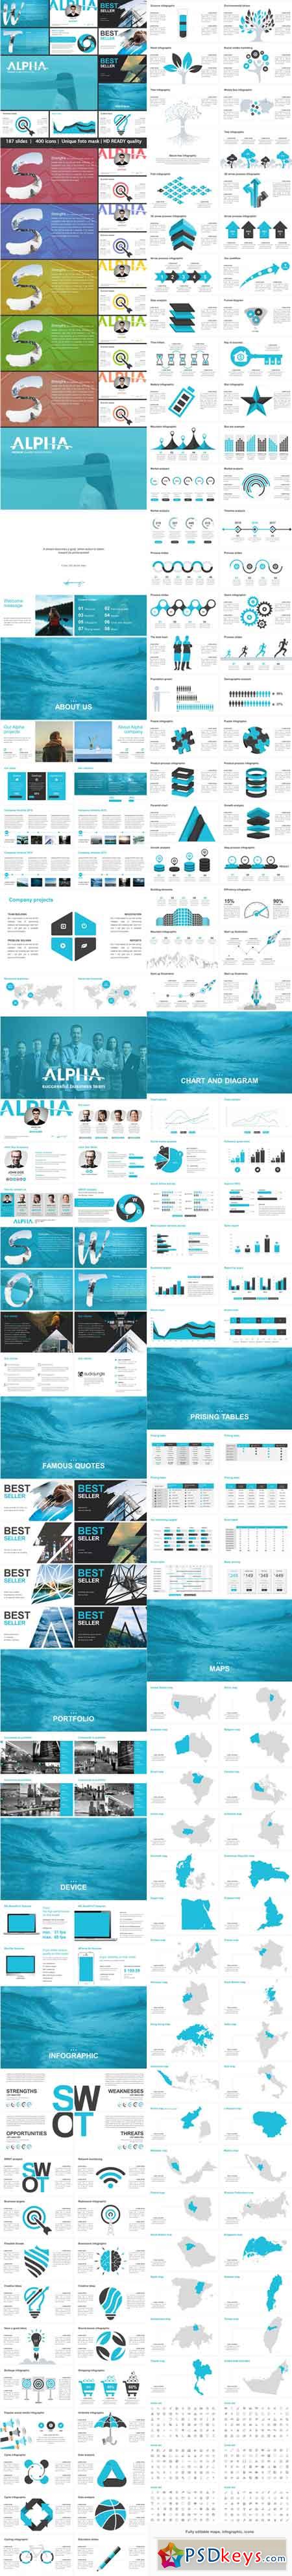 Successful Business Team Powerpoint Template 17594658